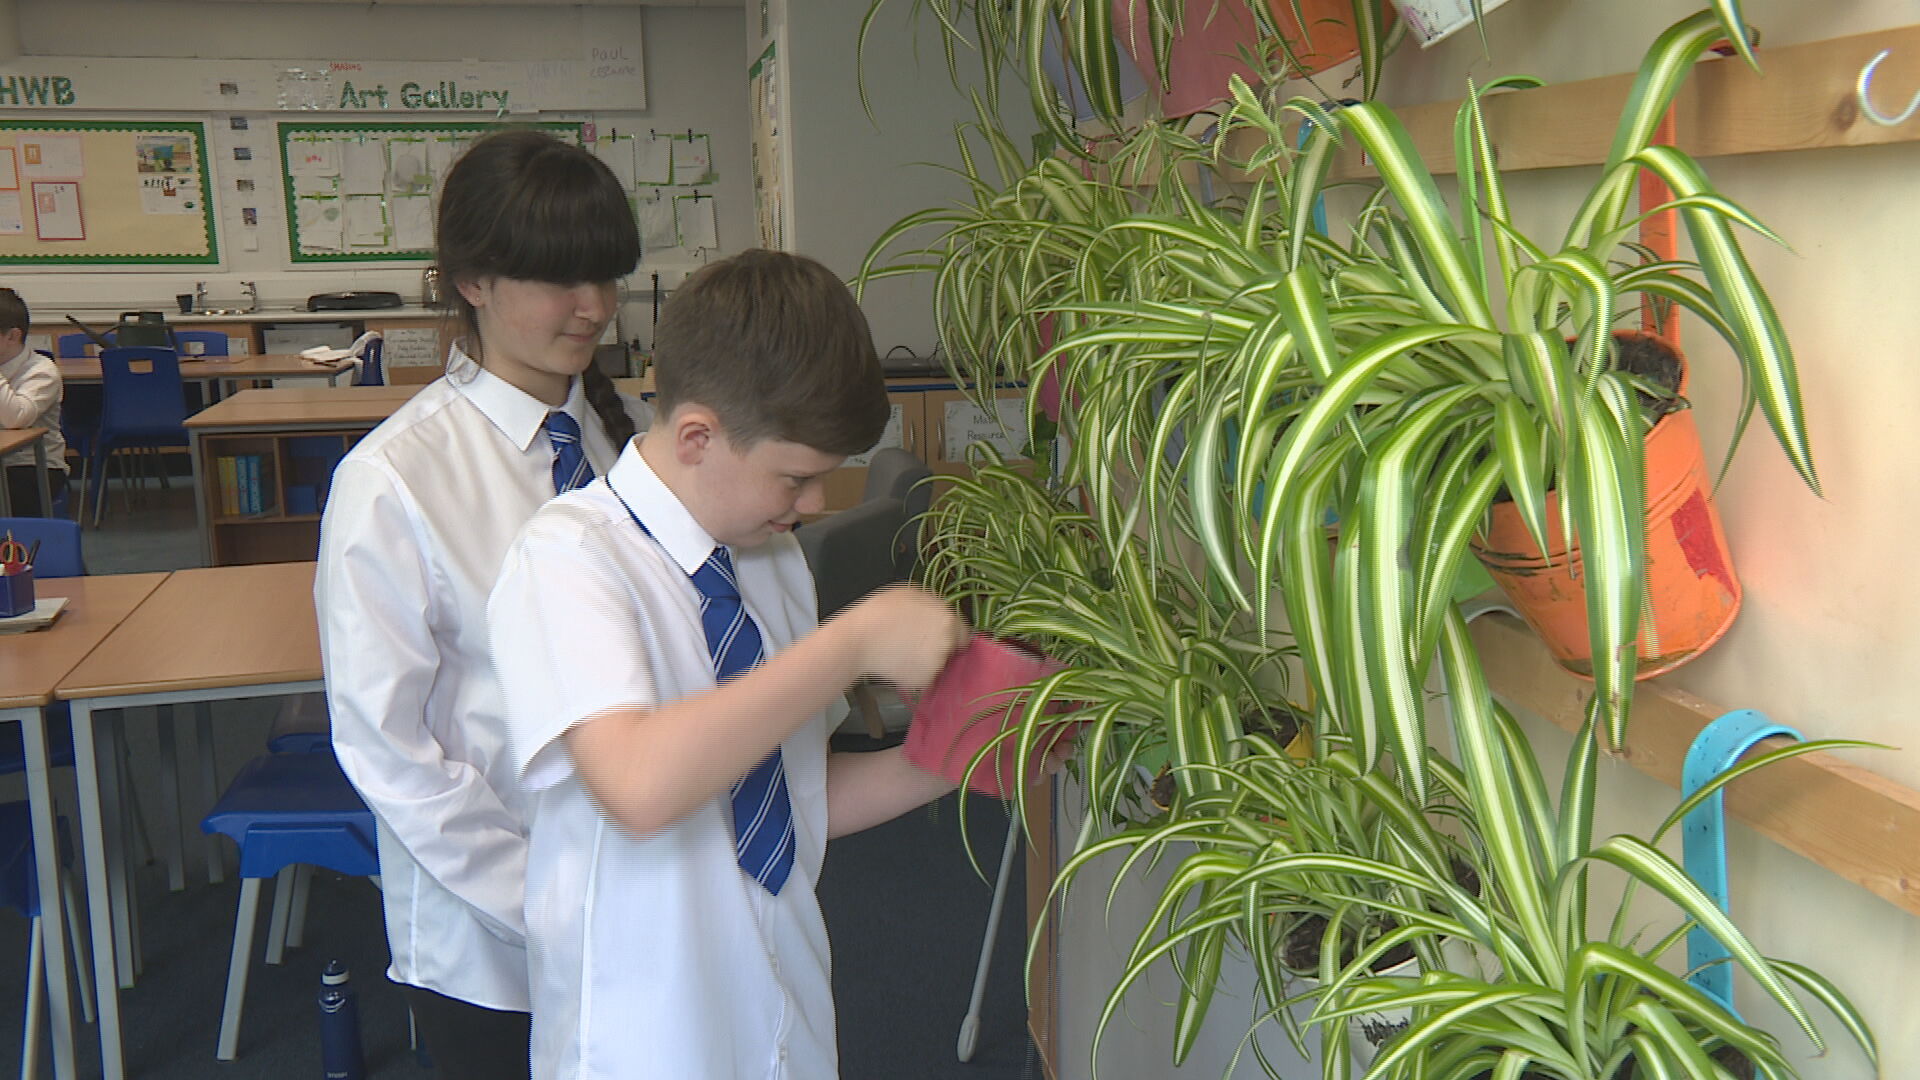 The pupils decided to get spider plants in their classroom to bring down the CO2 levels.